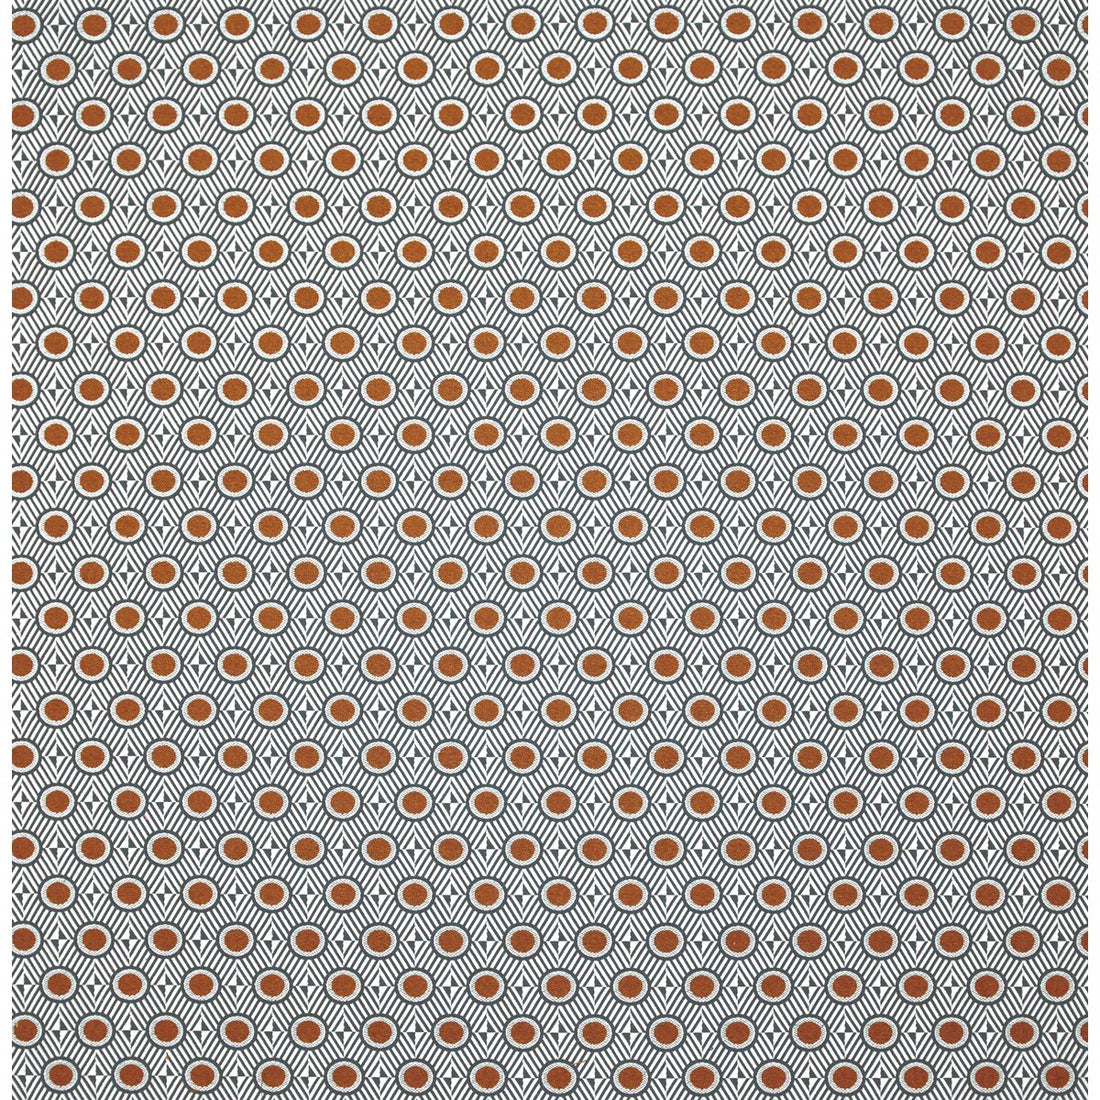 Morley fabric in naranja color - pattern GDT5400.3.0 - by Gaston y Daniela in the Gaston Africalia collection